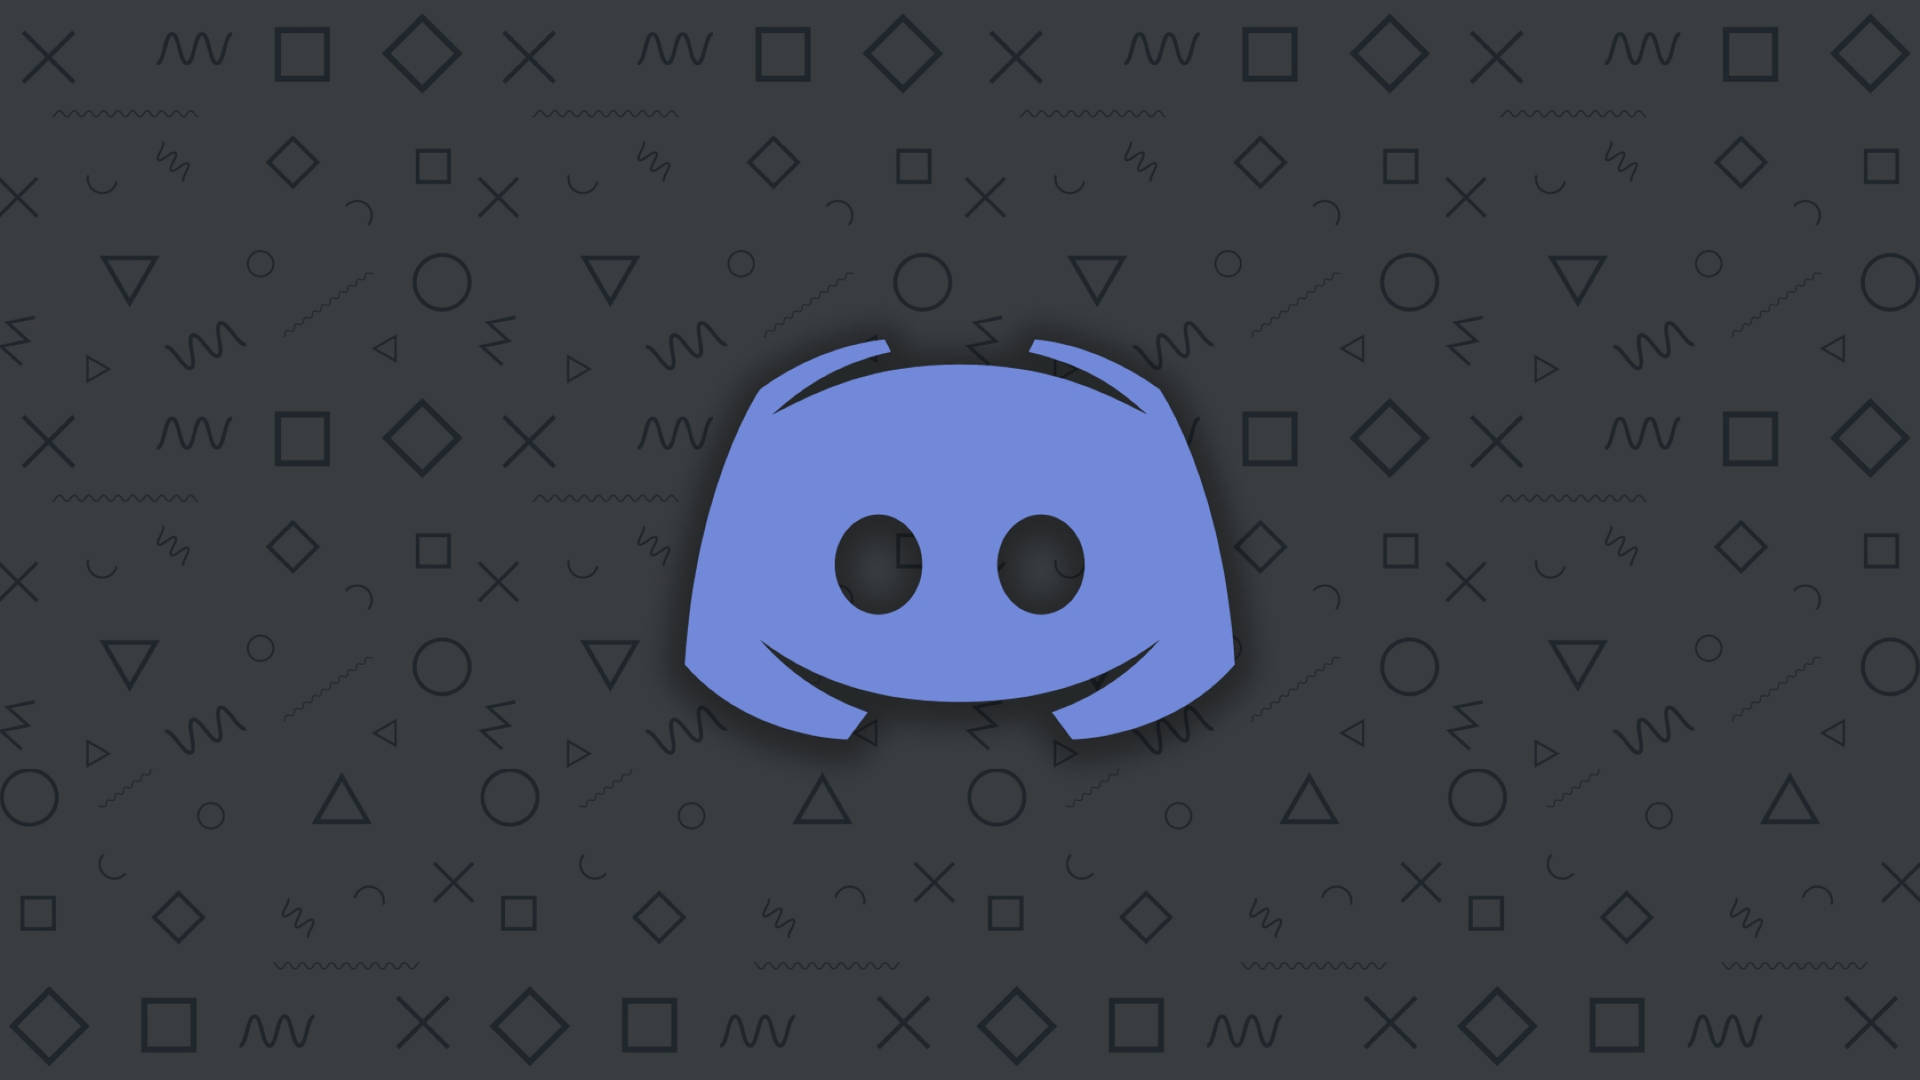 2160X1215 Discord Wallpaper and Background